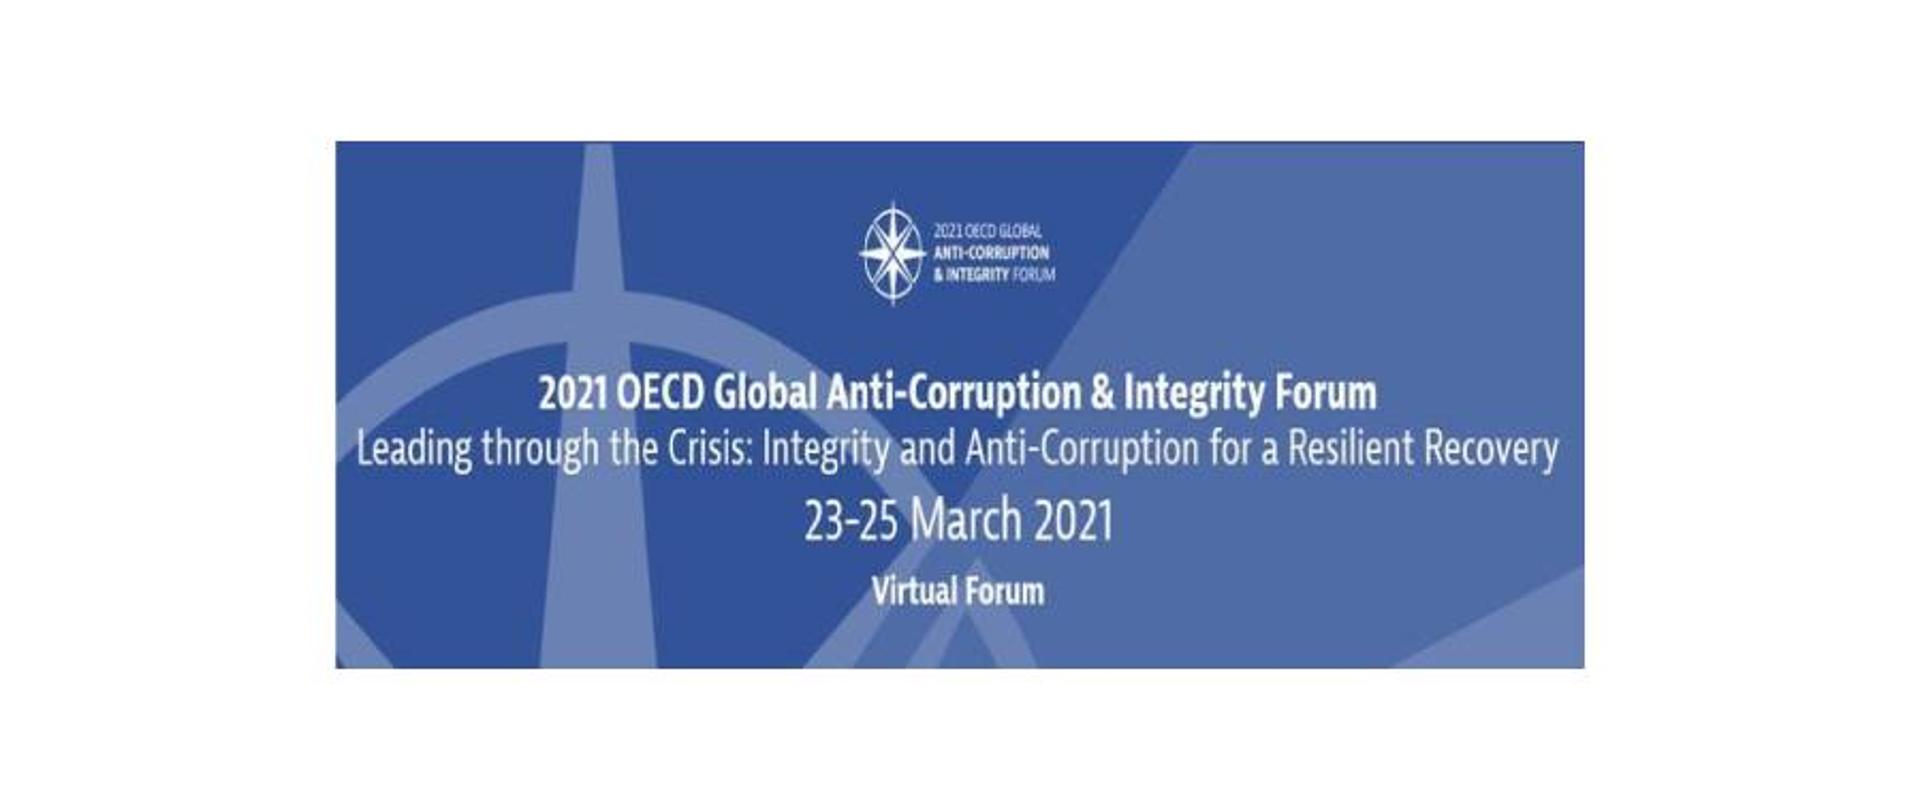 2021 OECD Global Anti-Corruption & Integrity Forum, Leading the Crisis: Integrity and Anti-Corruption for a Resilient Recovery, 23-25 March 2021, Virtual Forum